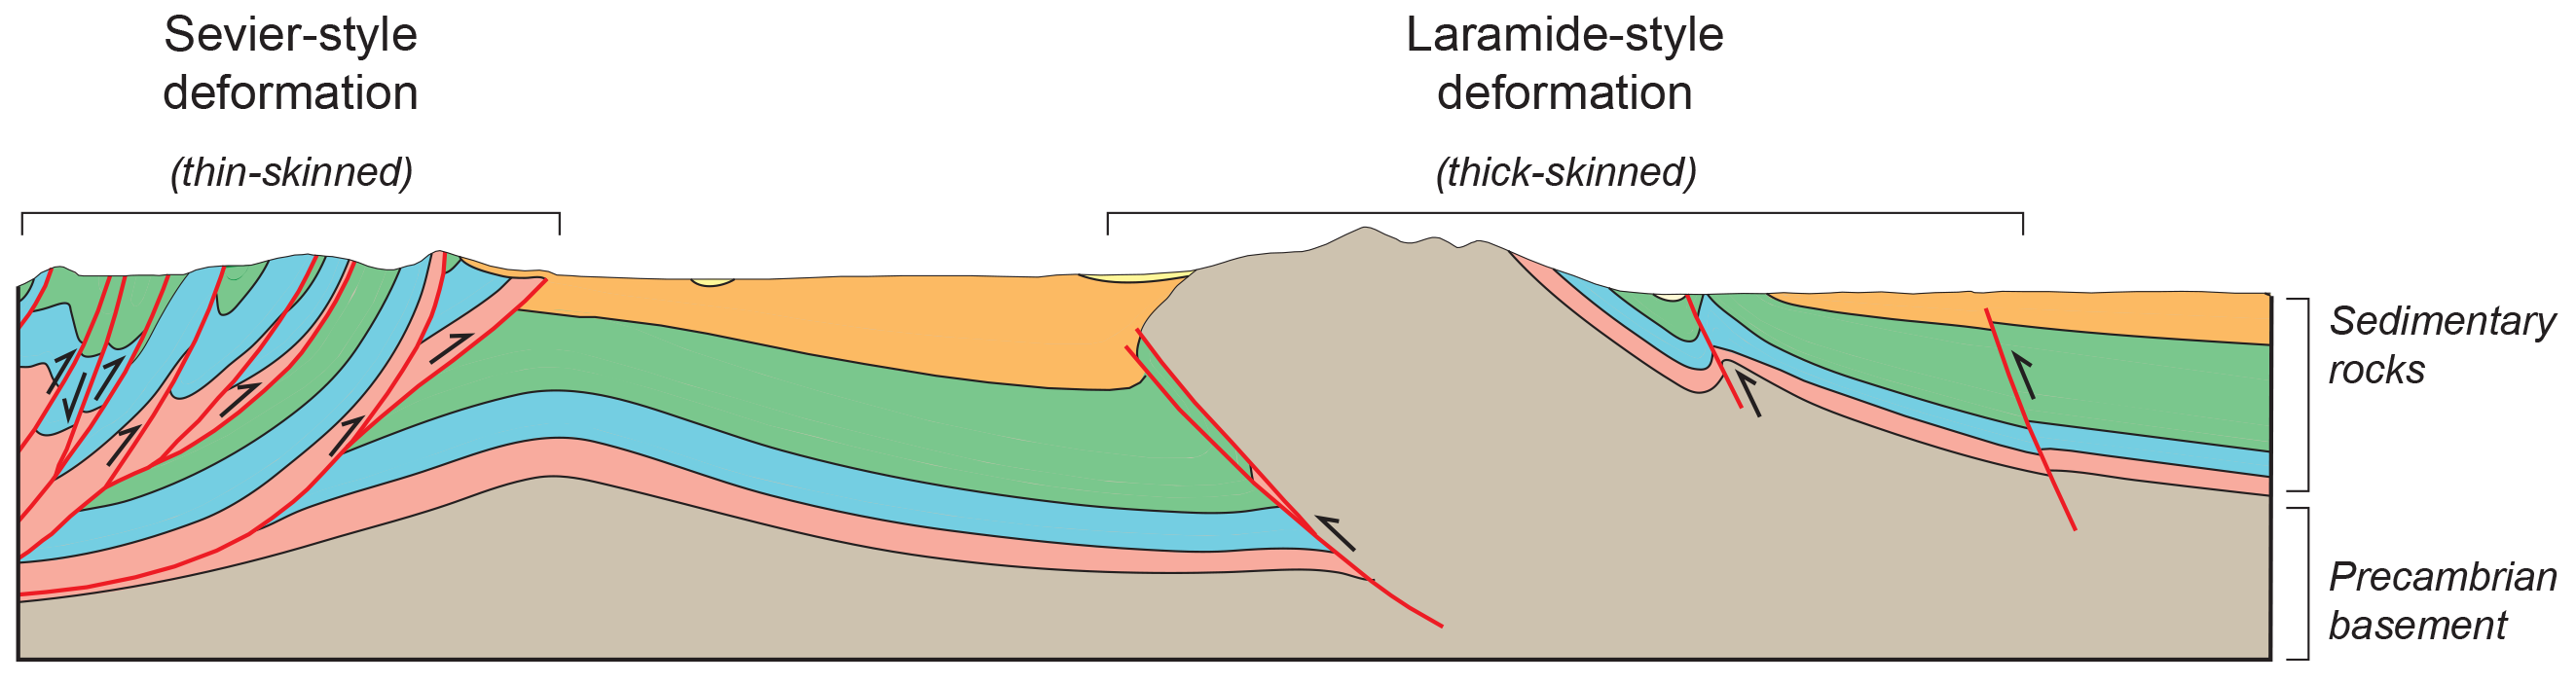 Sevier-style and Laramide-style deformation cross section